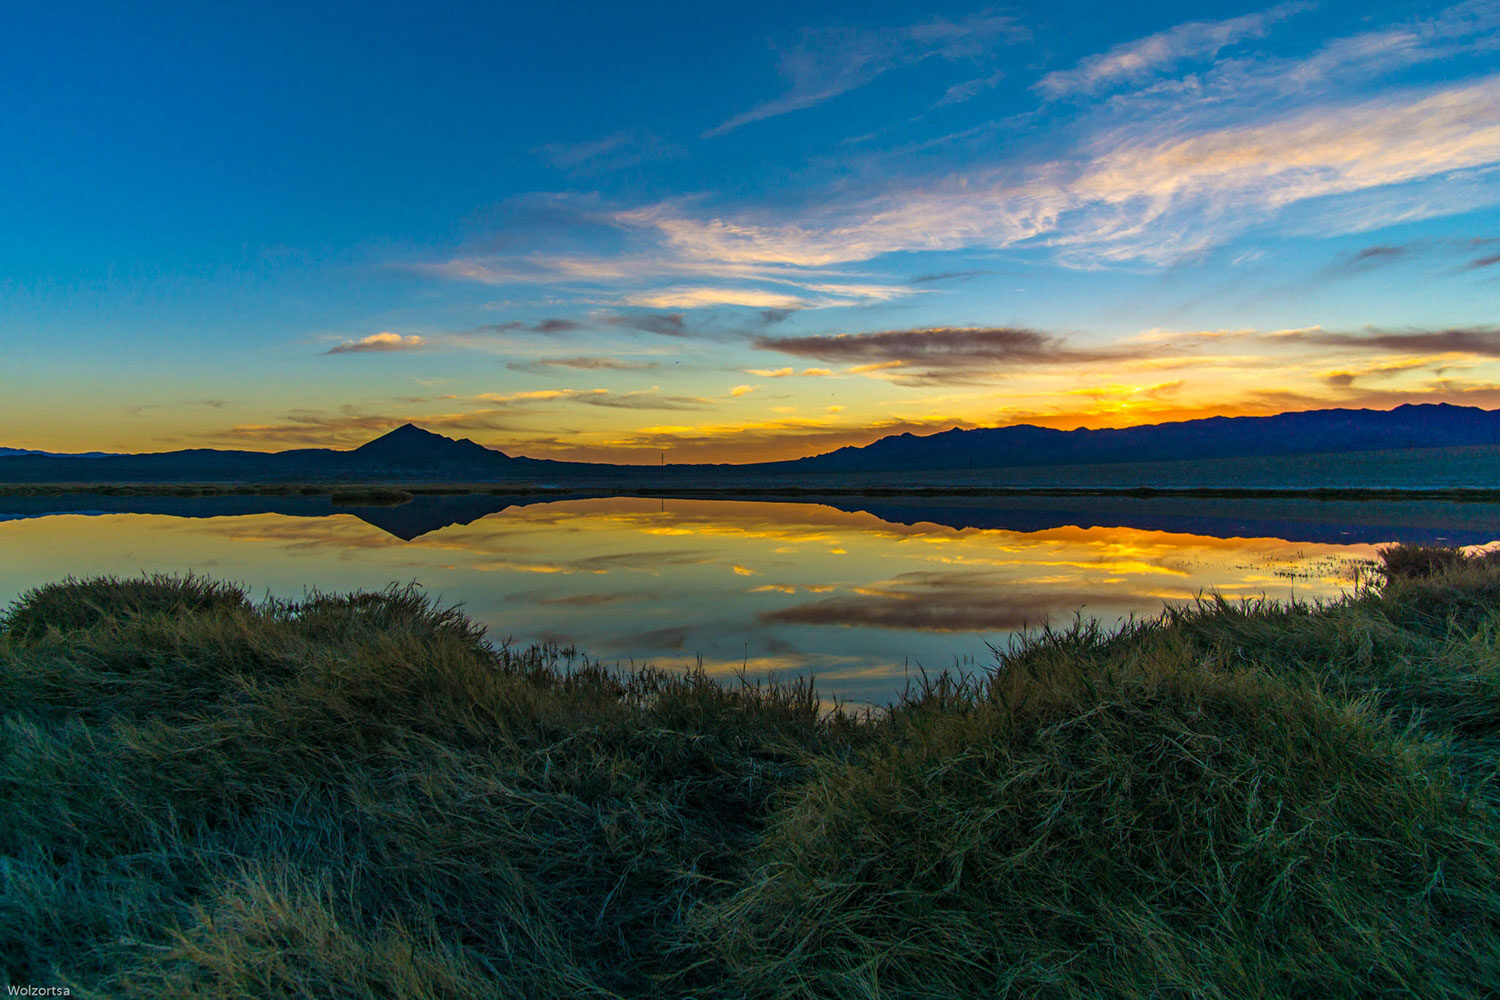 A lake surrounded by mountains during a colorful sunset in a remote desert region.